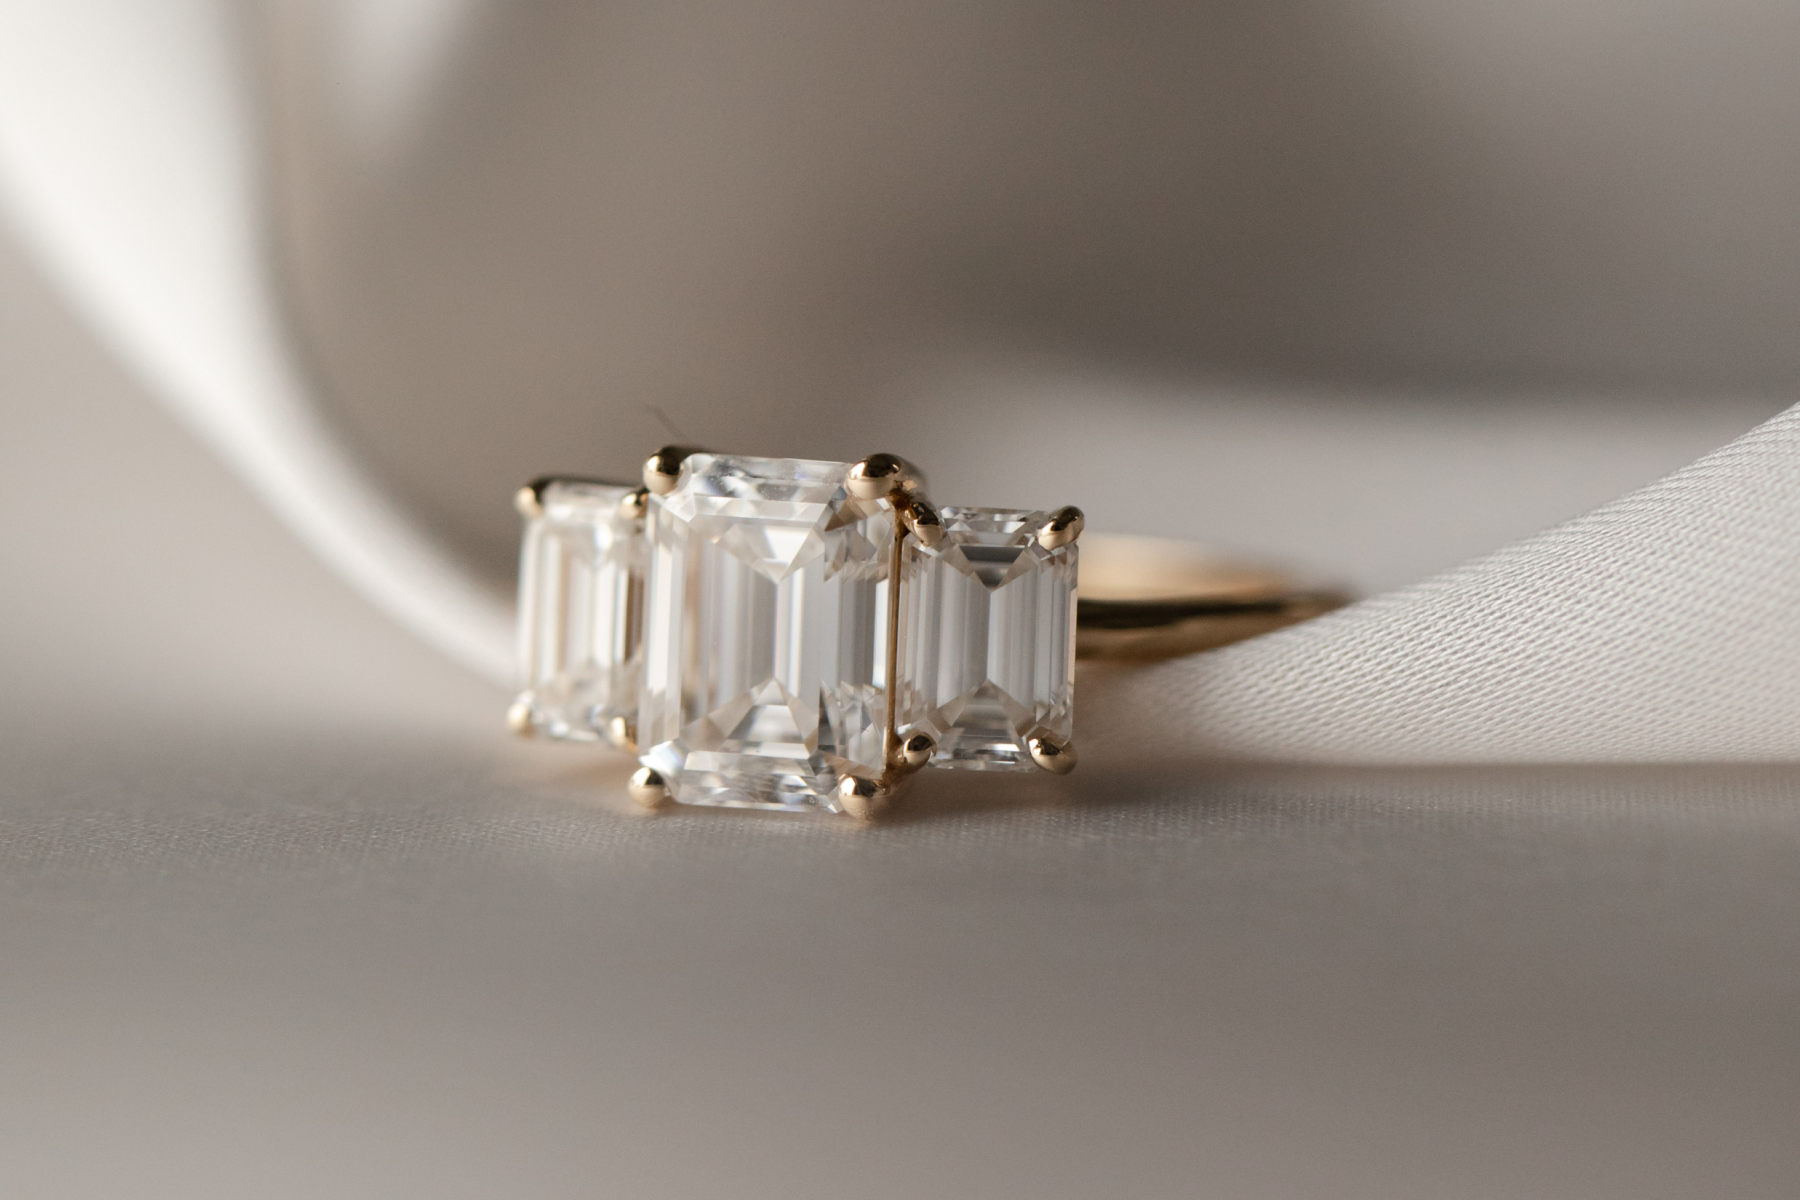 Engagement Ring Insurance 101: Everything You Need to Know